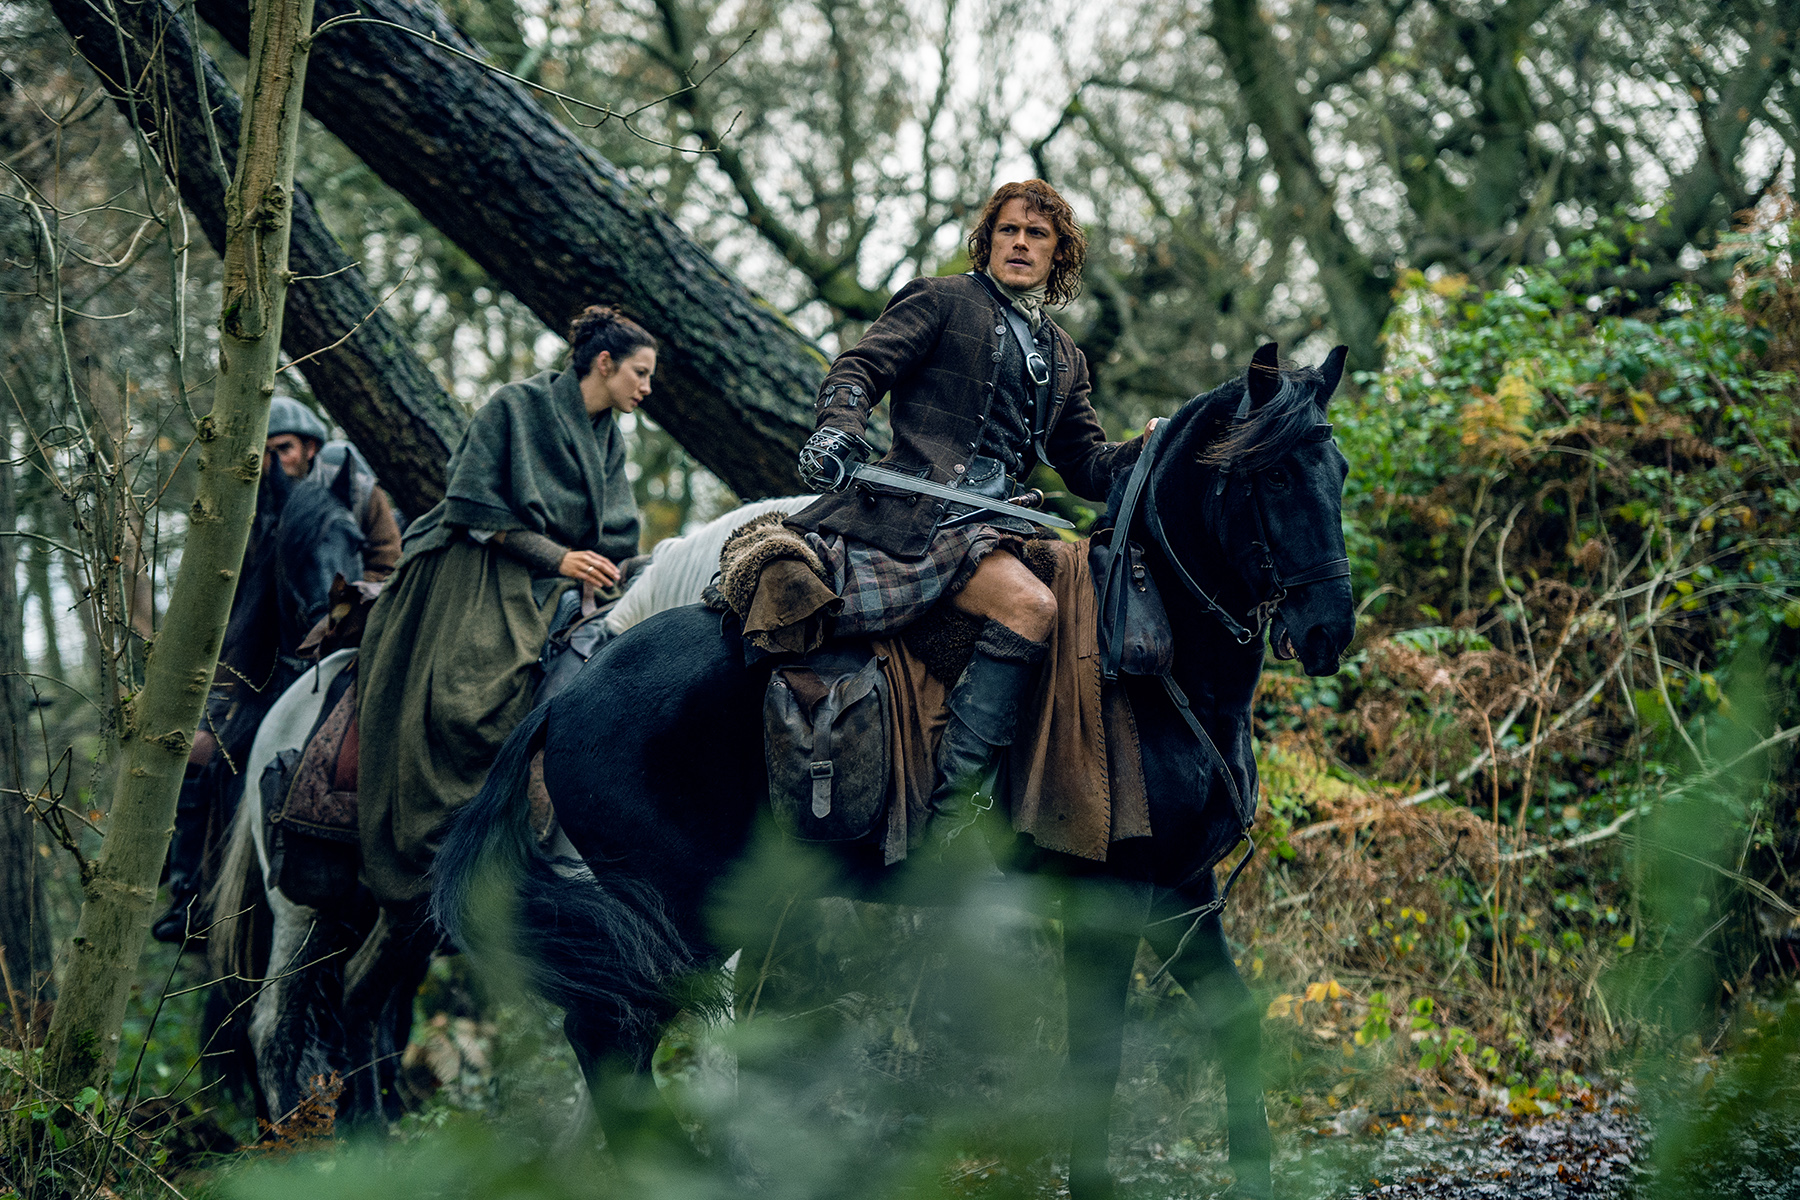 Of course, they look completely fabulous while doing it. (Left, Caitriona Balfe as Claire Fraser. Right, Sam Heughan as Jamie Fraser. They are riding horses through the woods.)